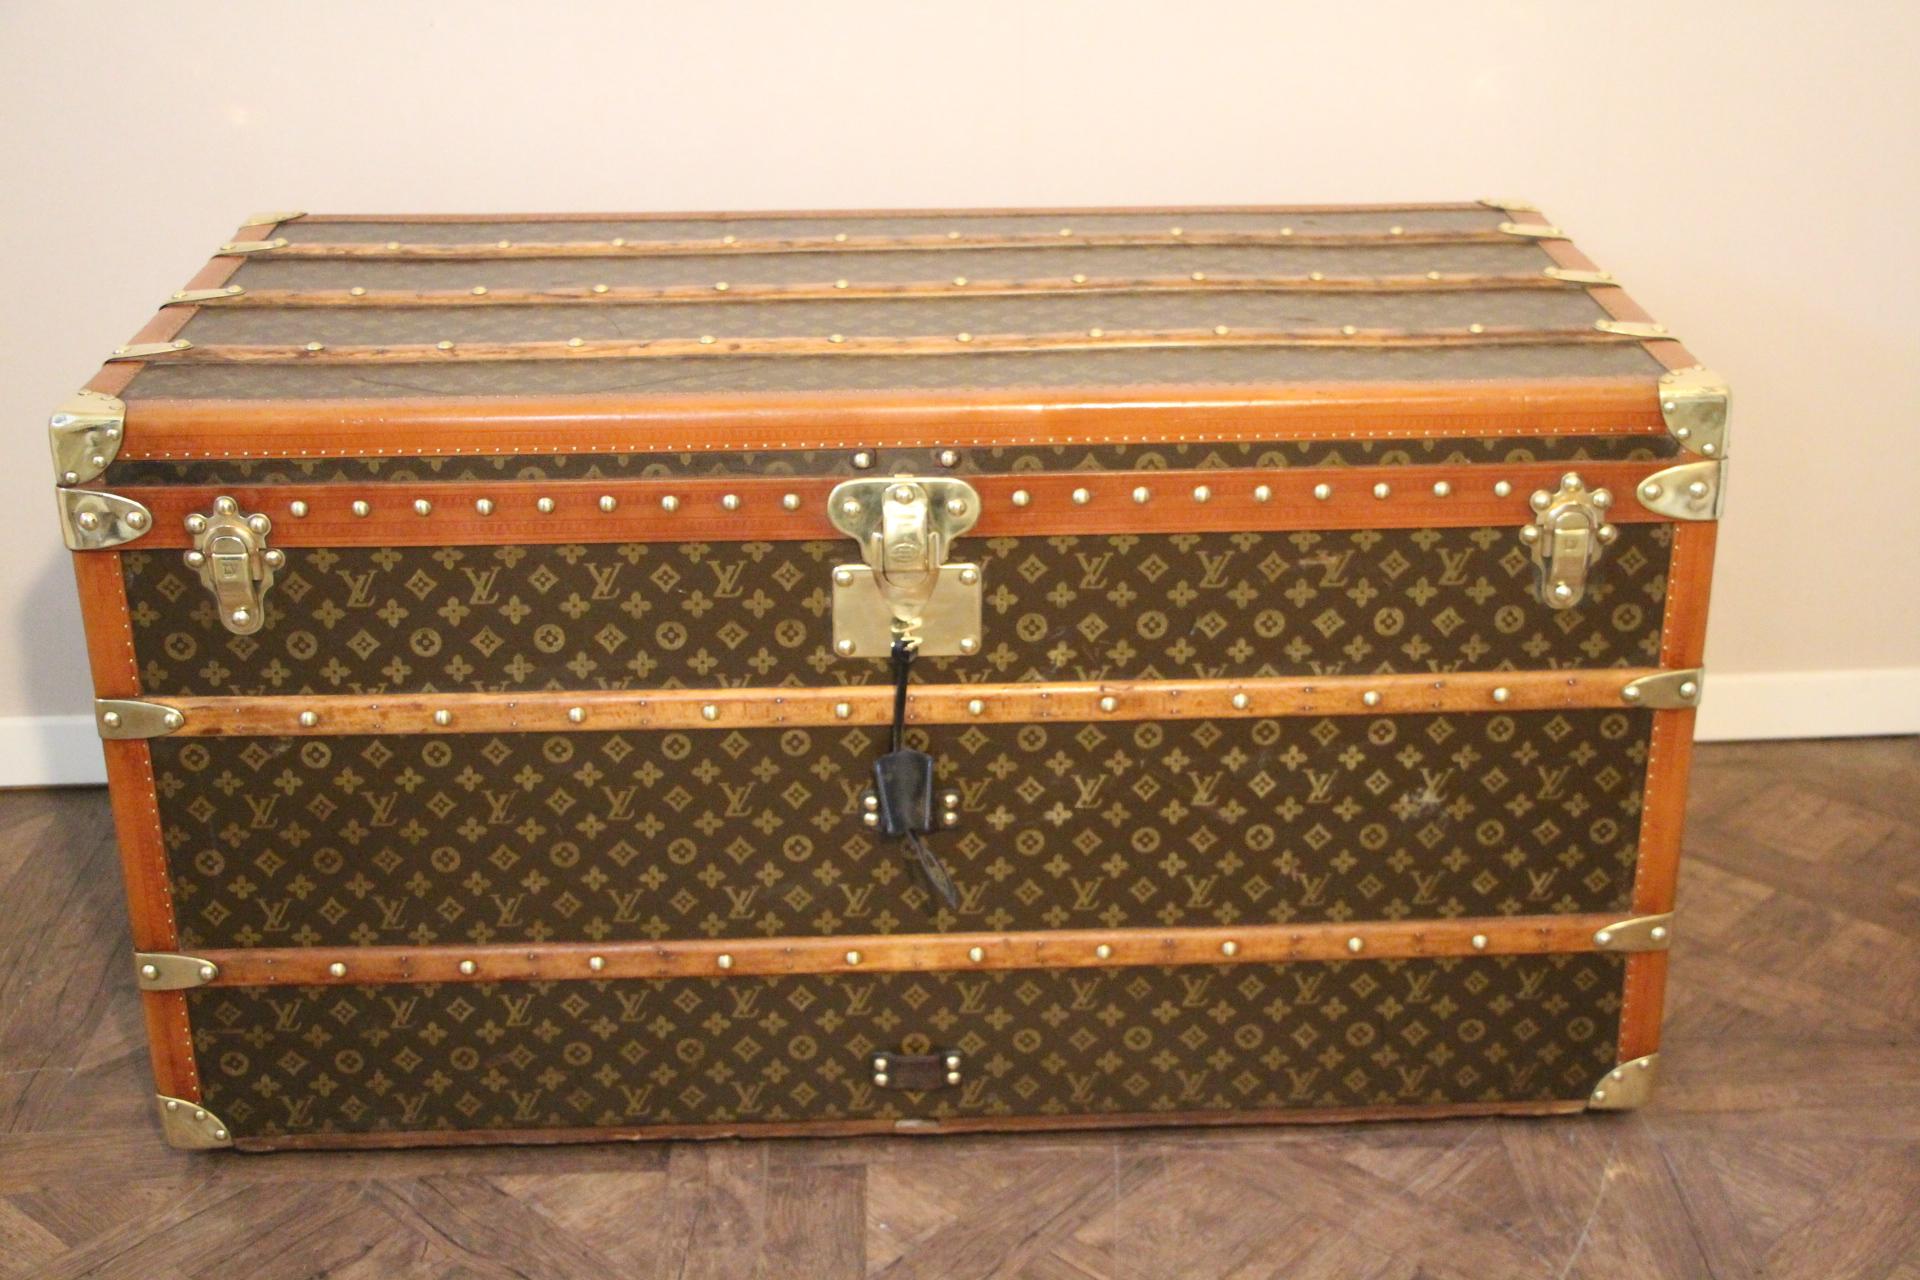 Beautiful Louis Vuitton steamer trunk featuring stenciled canvas, all honey color lozine trim, solid brass Louis Vuitton stamped clasps and lock, solid brass corners and large leather side handles.
Customizes painted stripes on its sides. Very warm